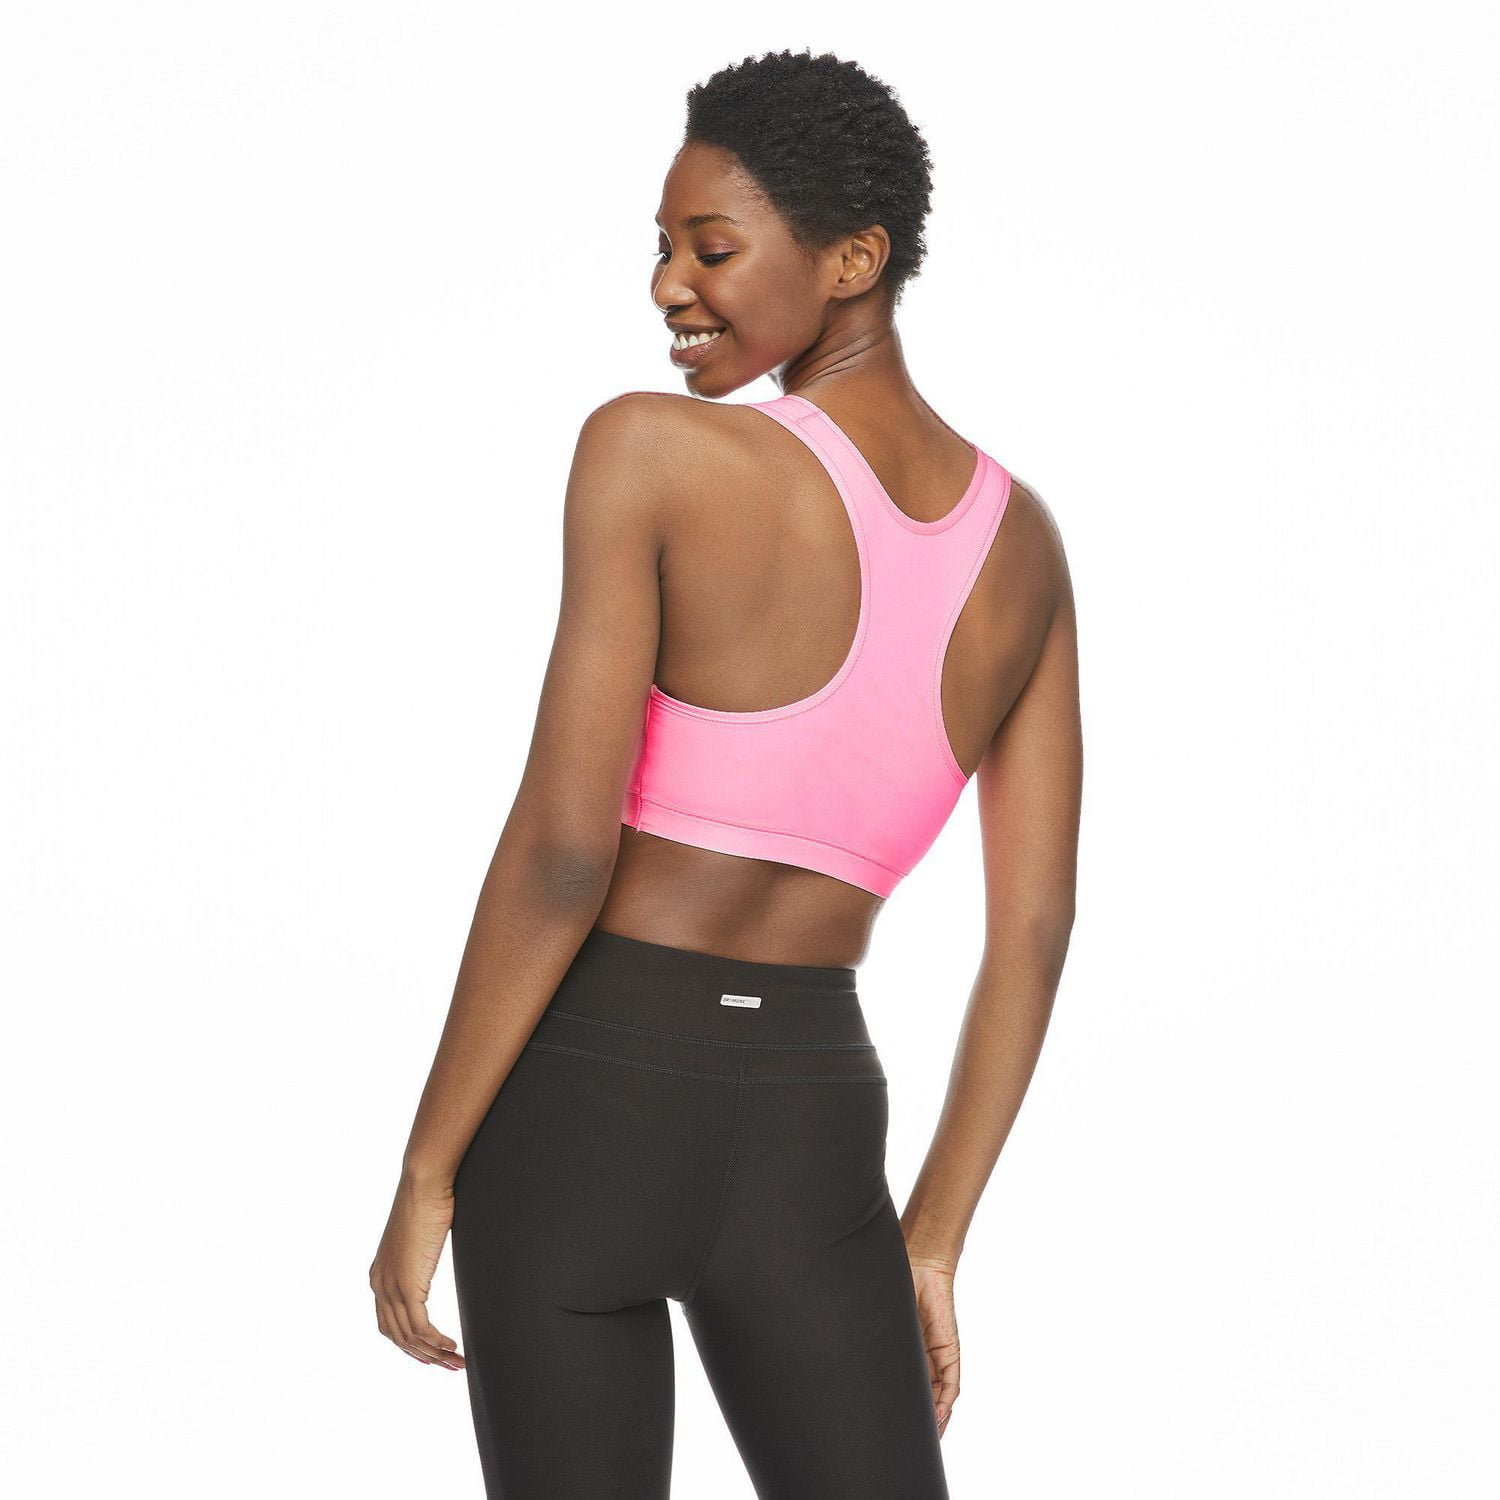 Max Fashion - With the Printed Racerback Sports Bra, you